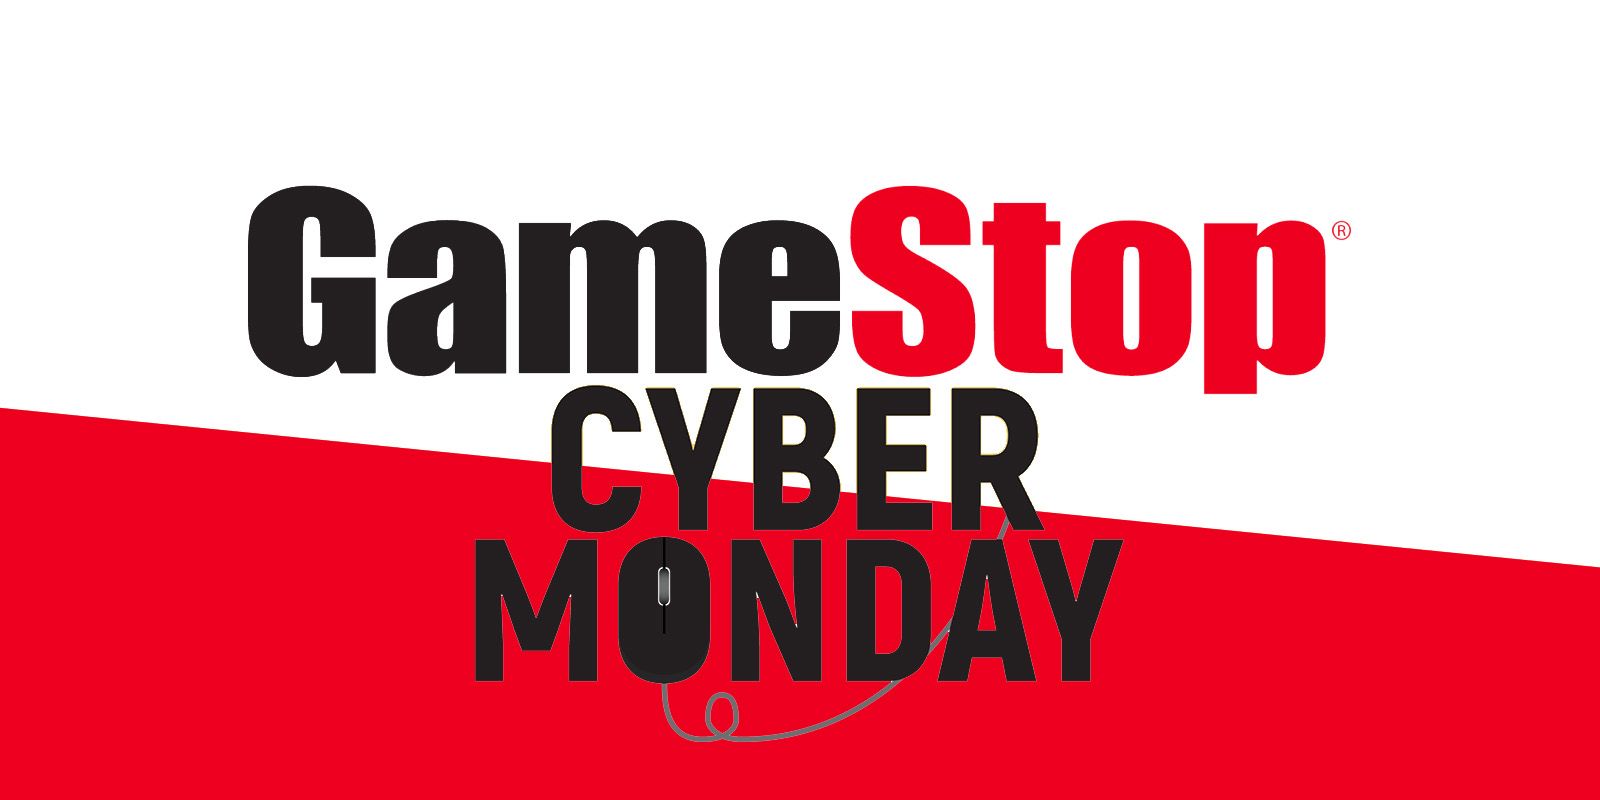 Gamestop S Cyber Monday Deals Black Ops 4 Hitman 2 And More